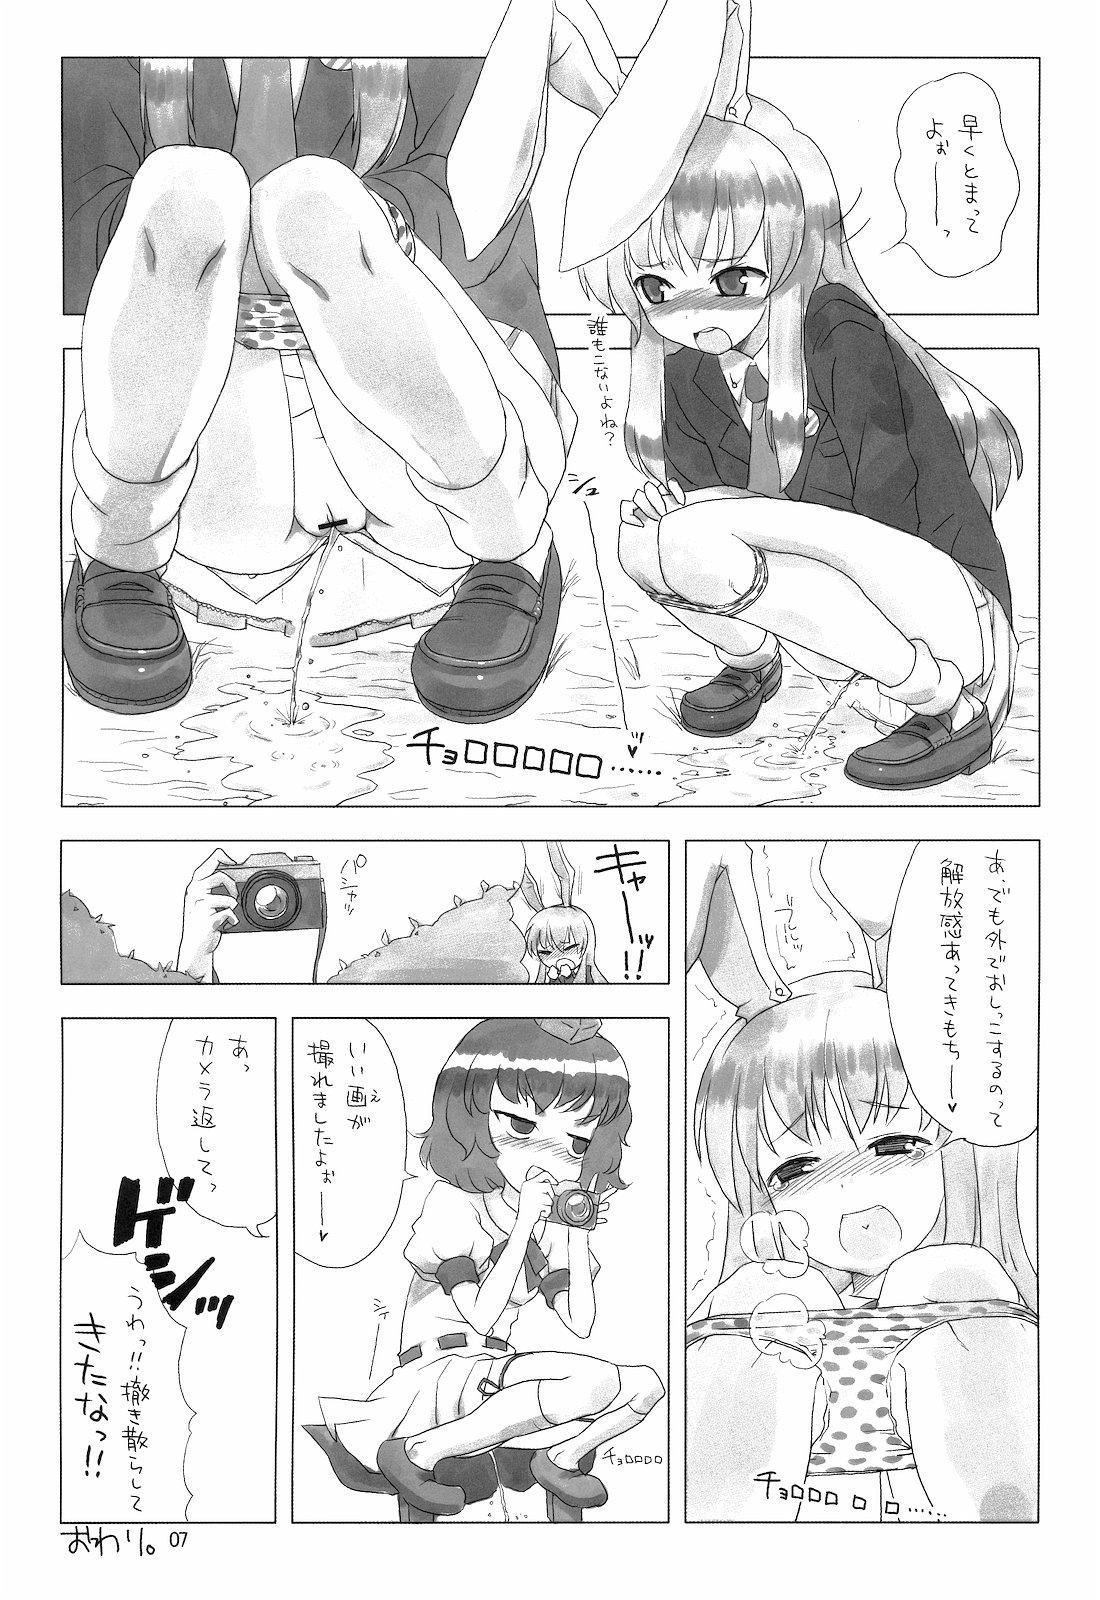 Phat Ass Ero Copy Bon - Touhou project Spooning - Page 6